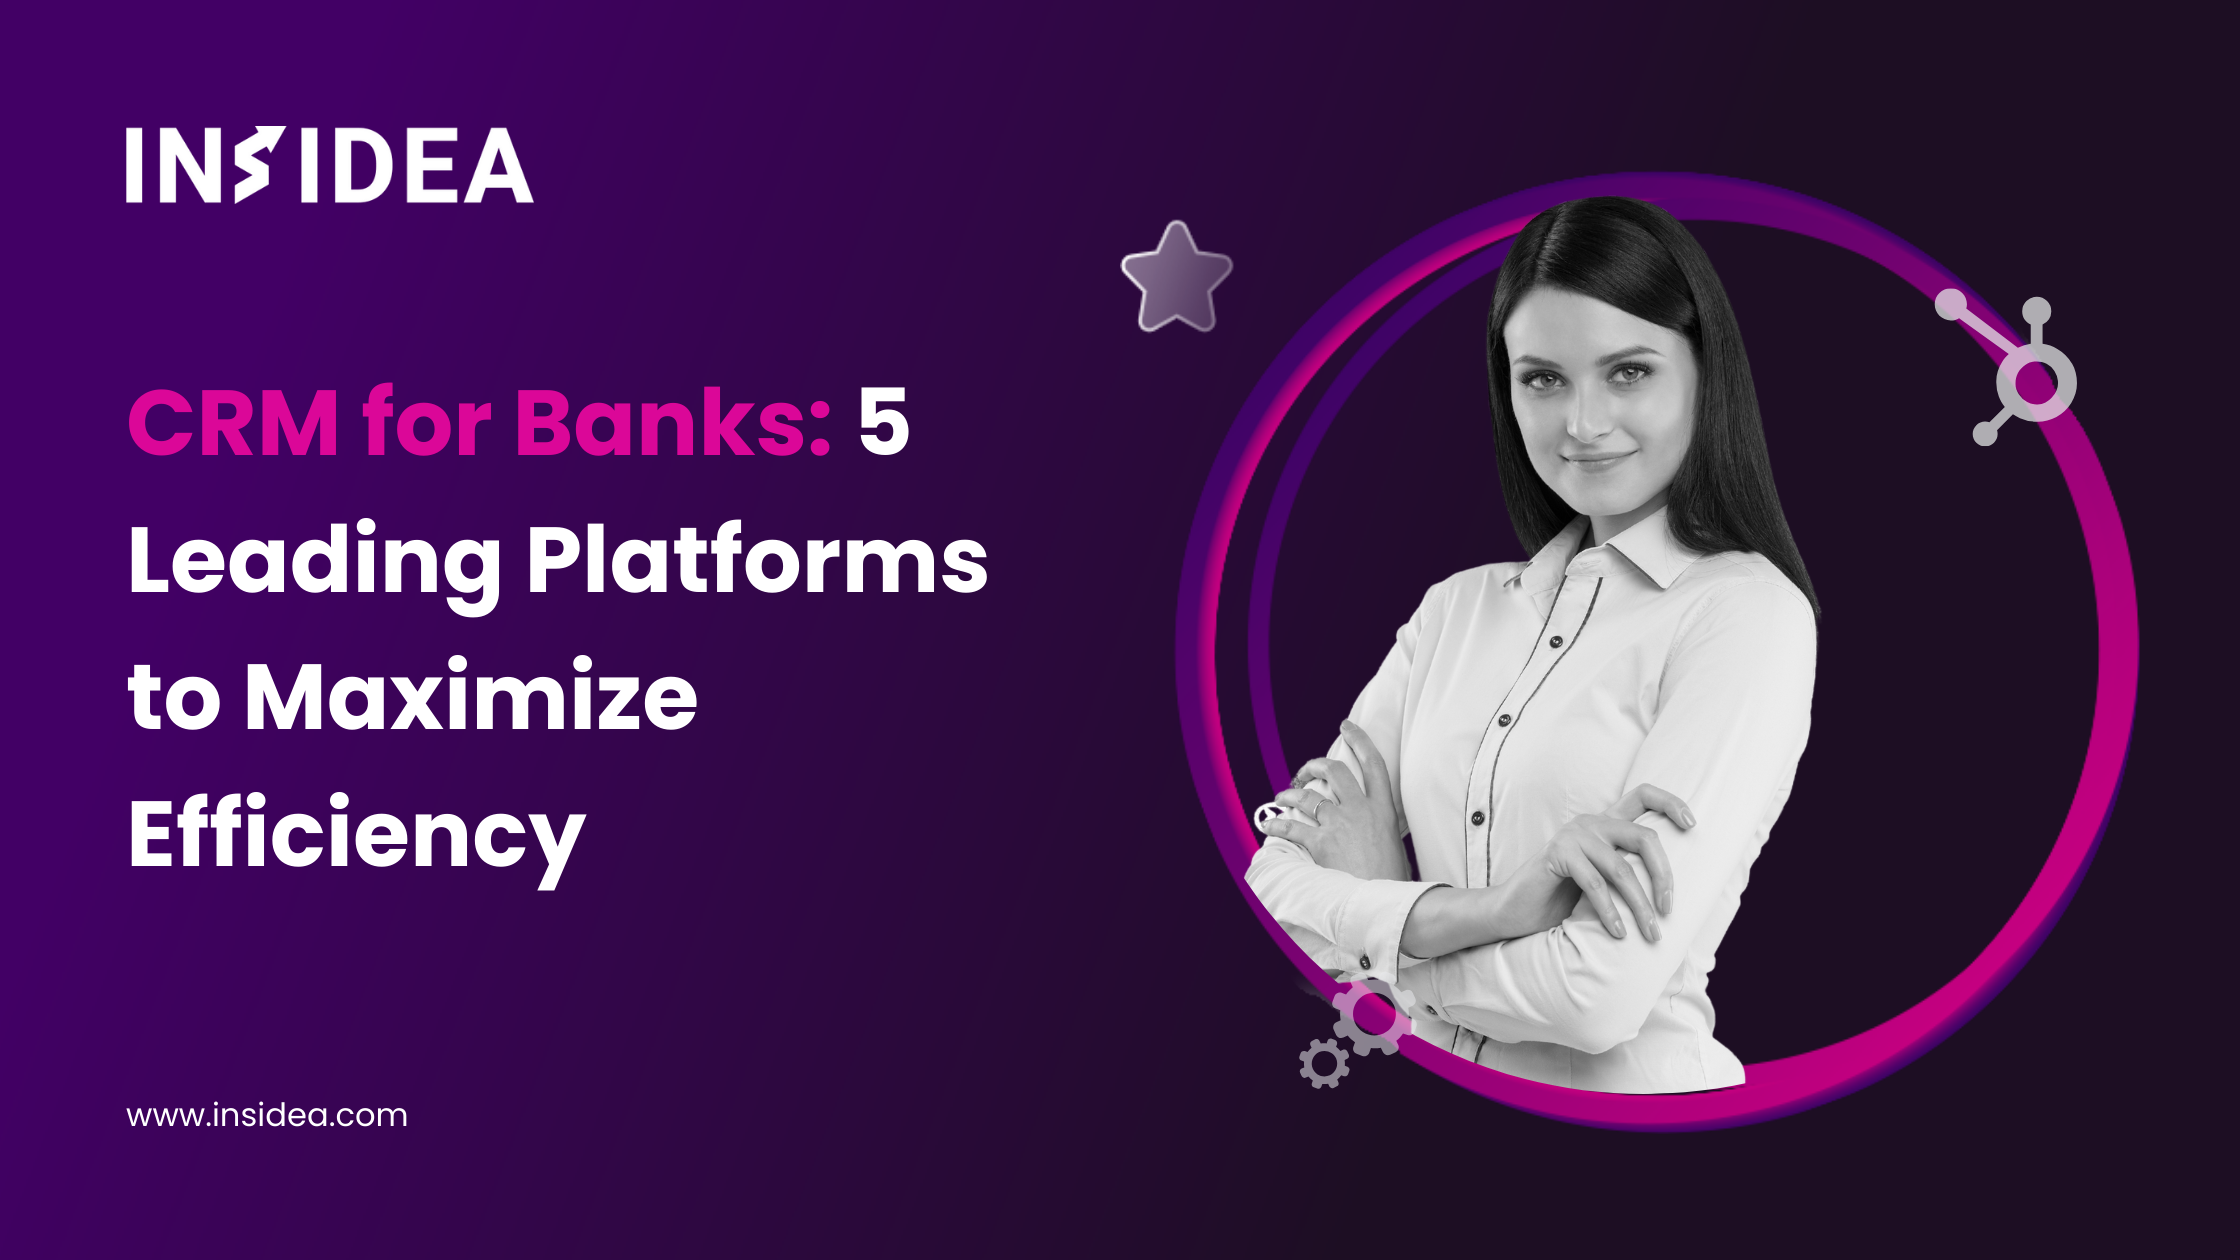 CRM for Banks 5 Leading Platforms to Maximize Efficiency